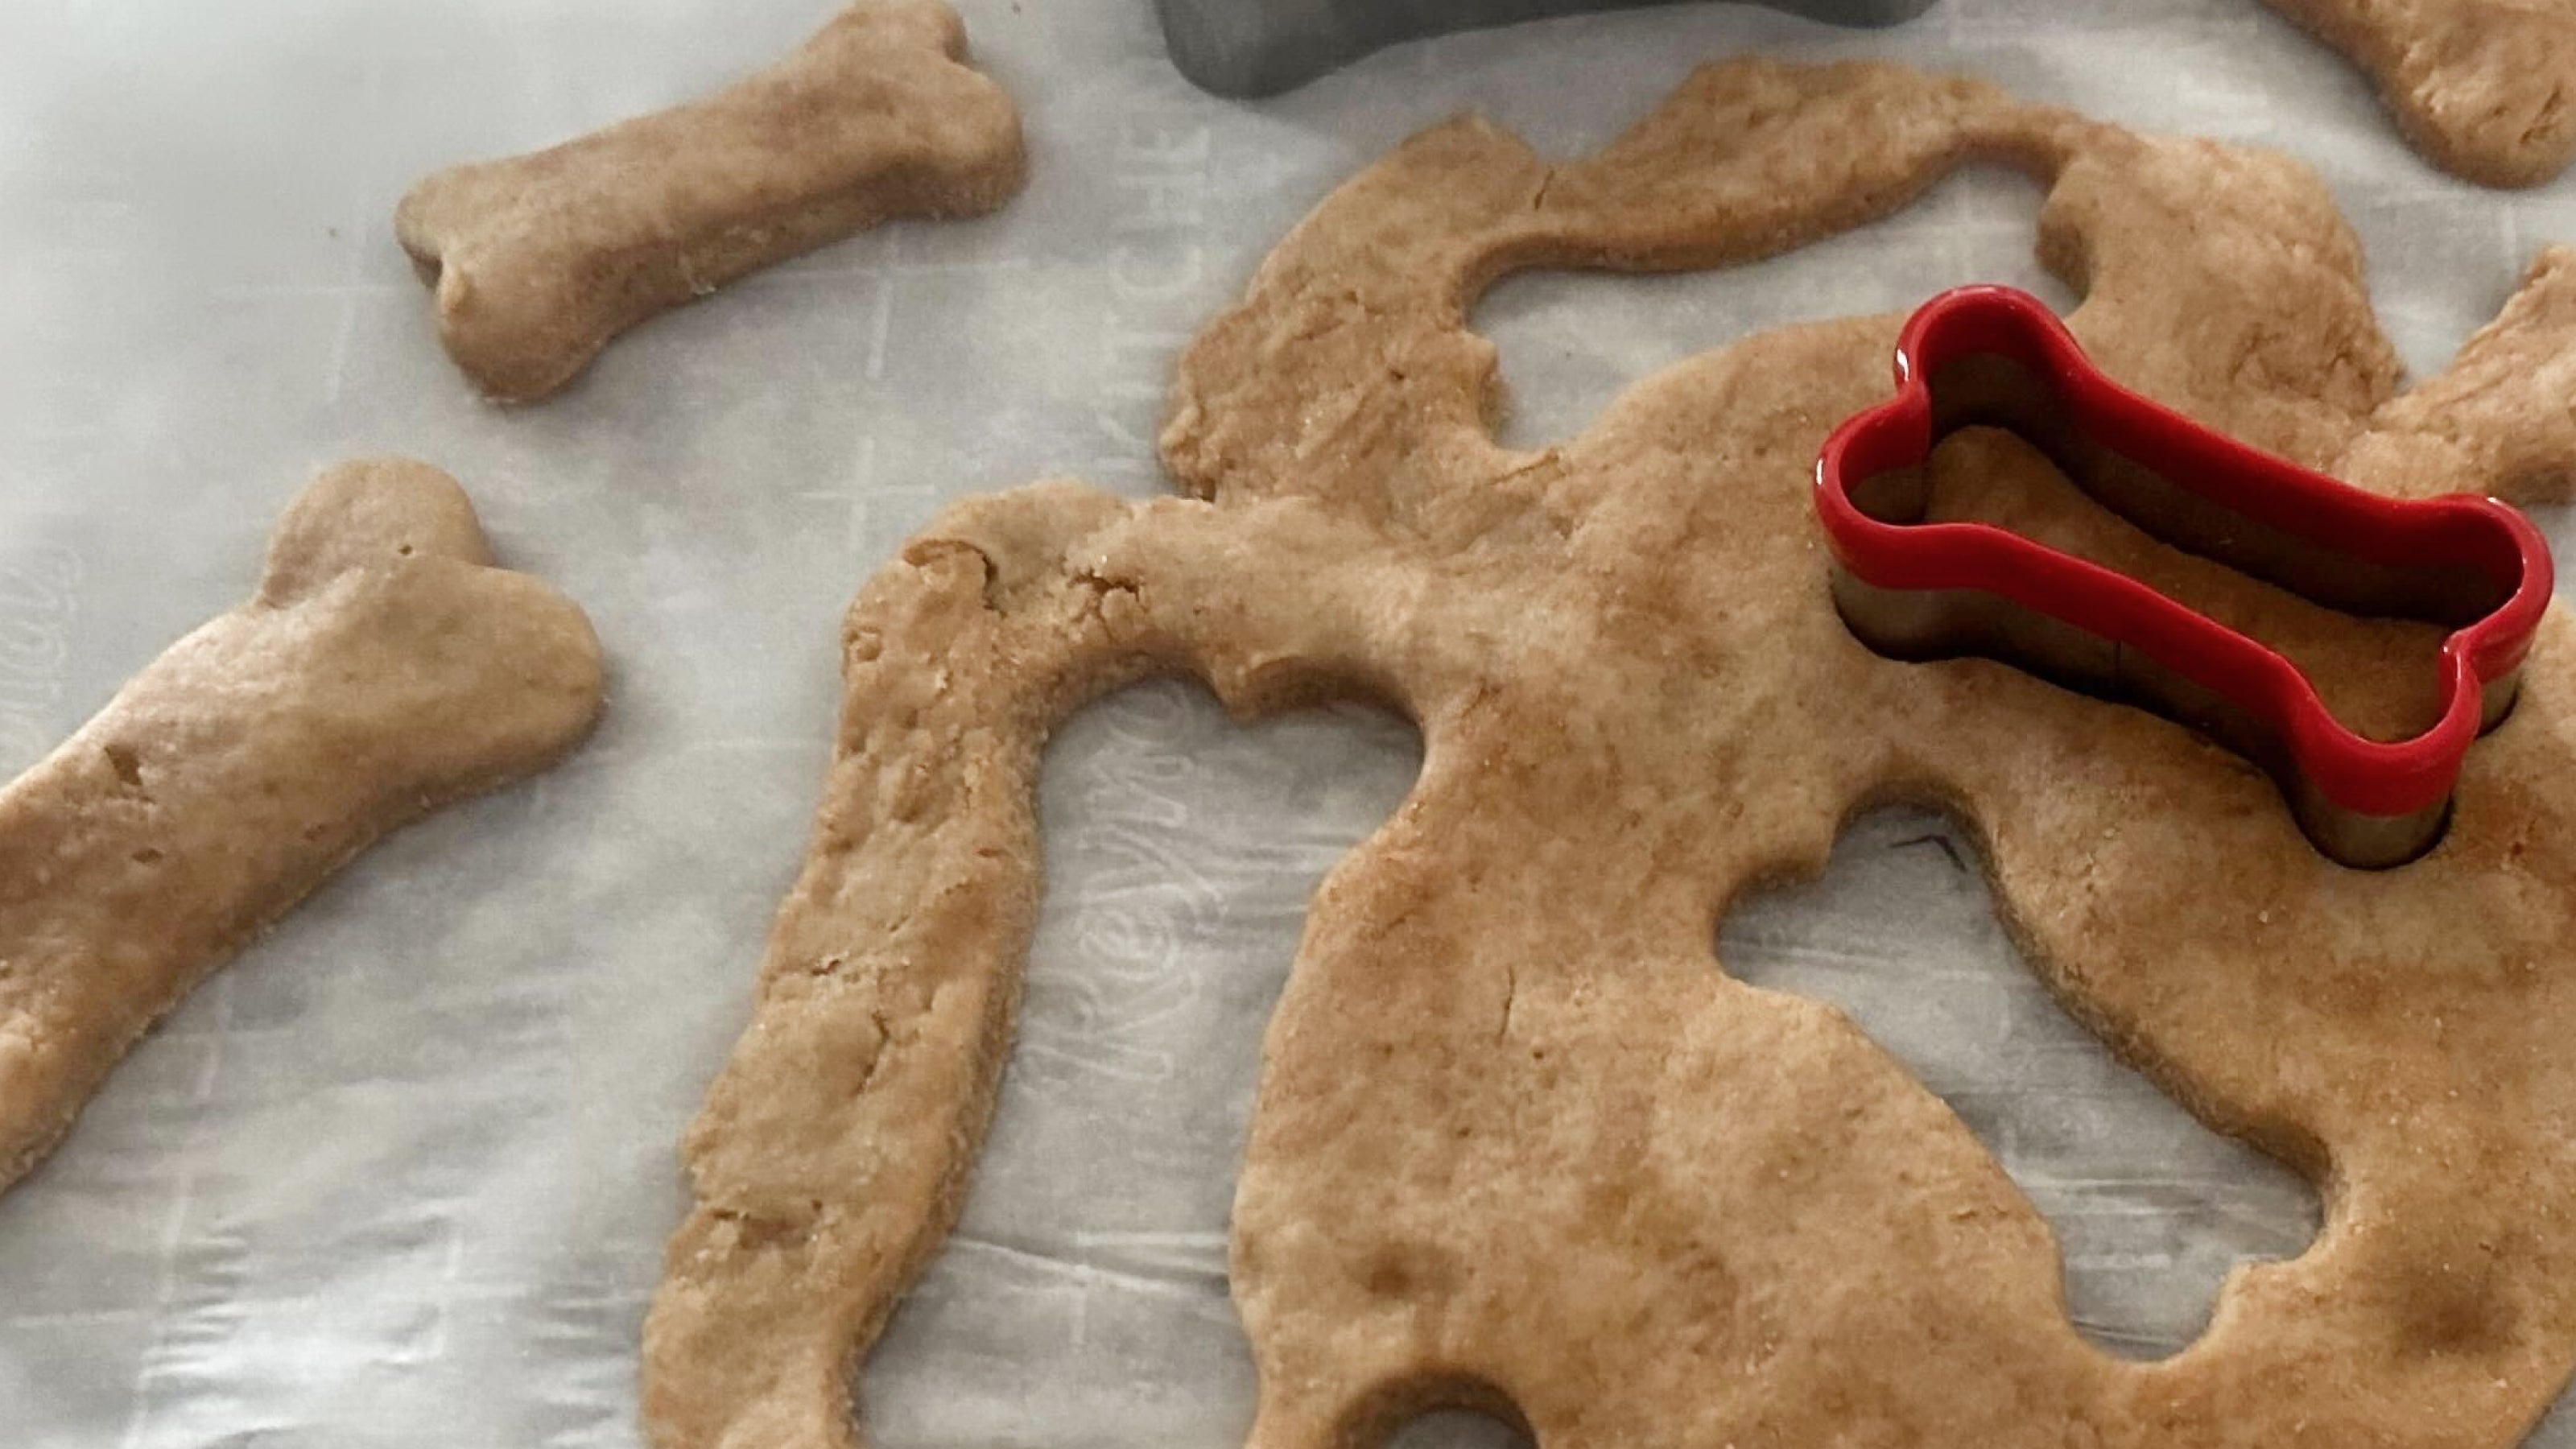 Dog treat dough cut into dog bones with red cookie cutter on parchment paper